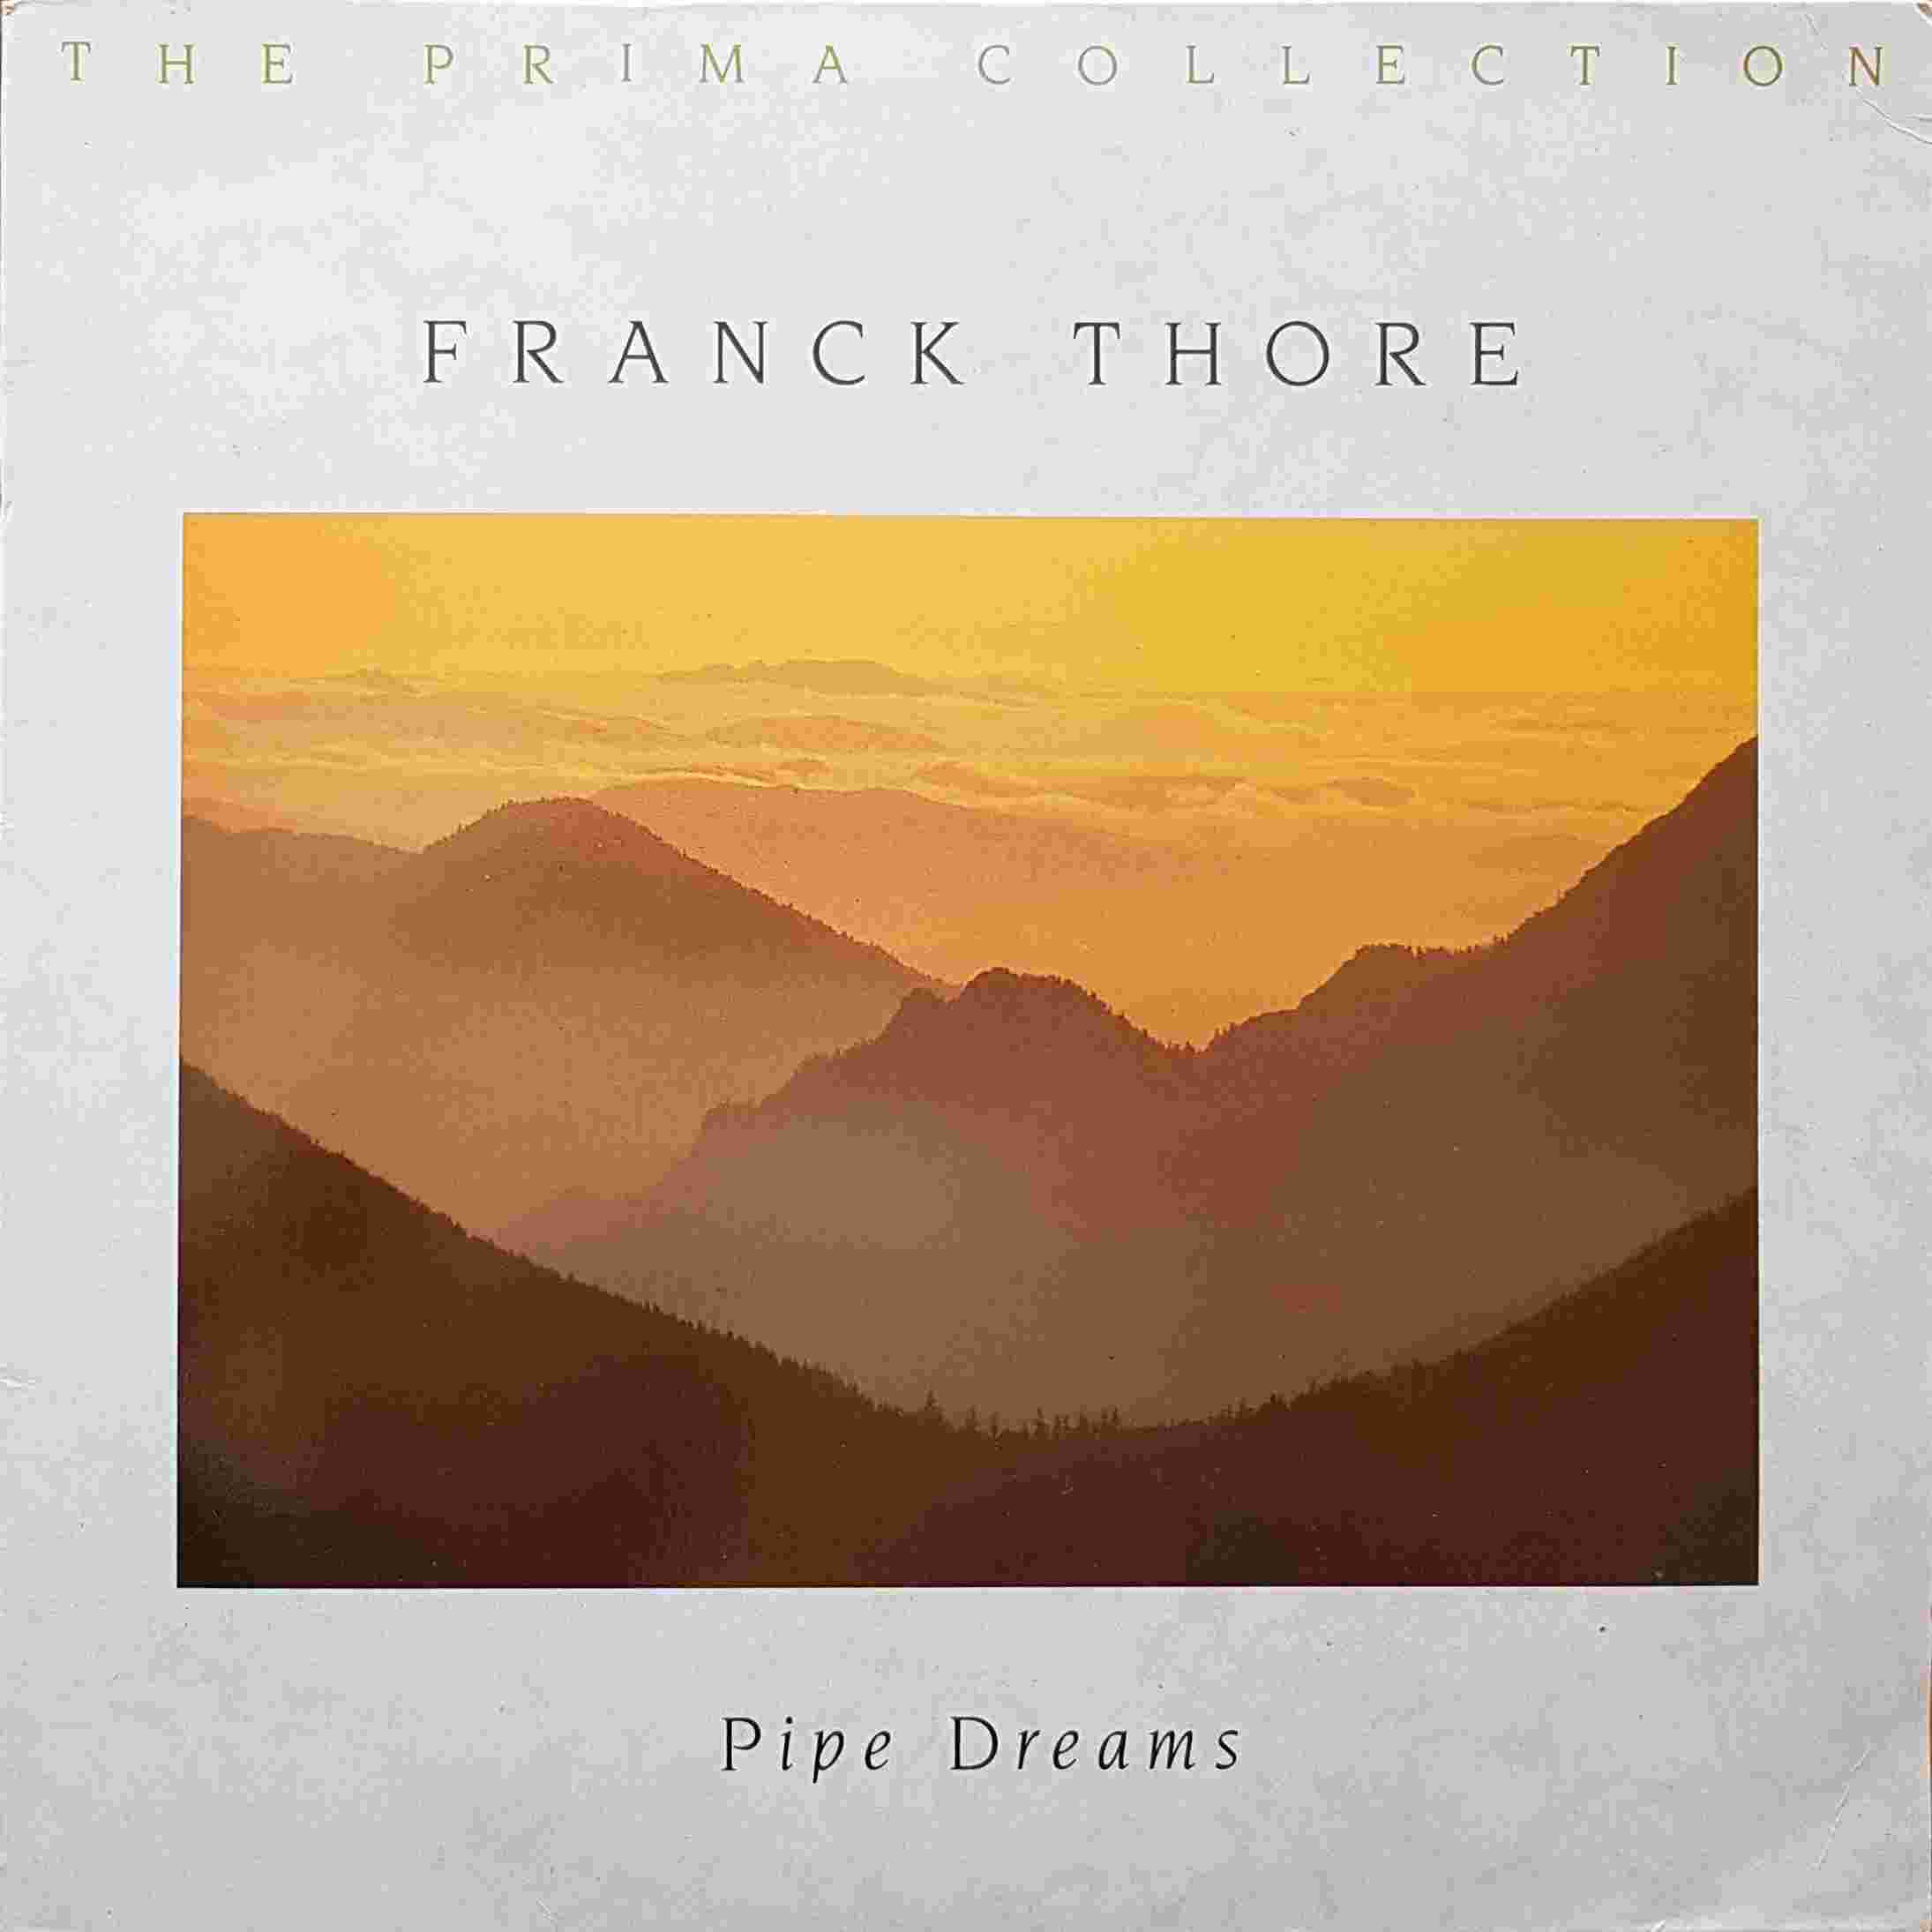 Picture of Pipe dreams by artist Frank Thore from the BBC albums - Records and Tapes library